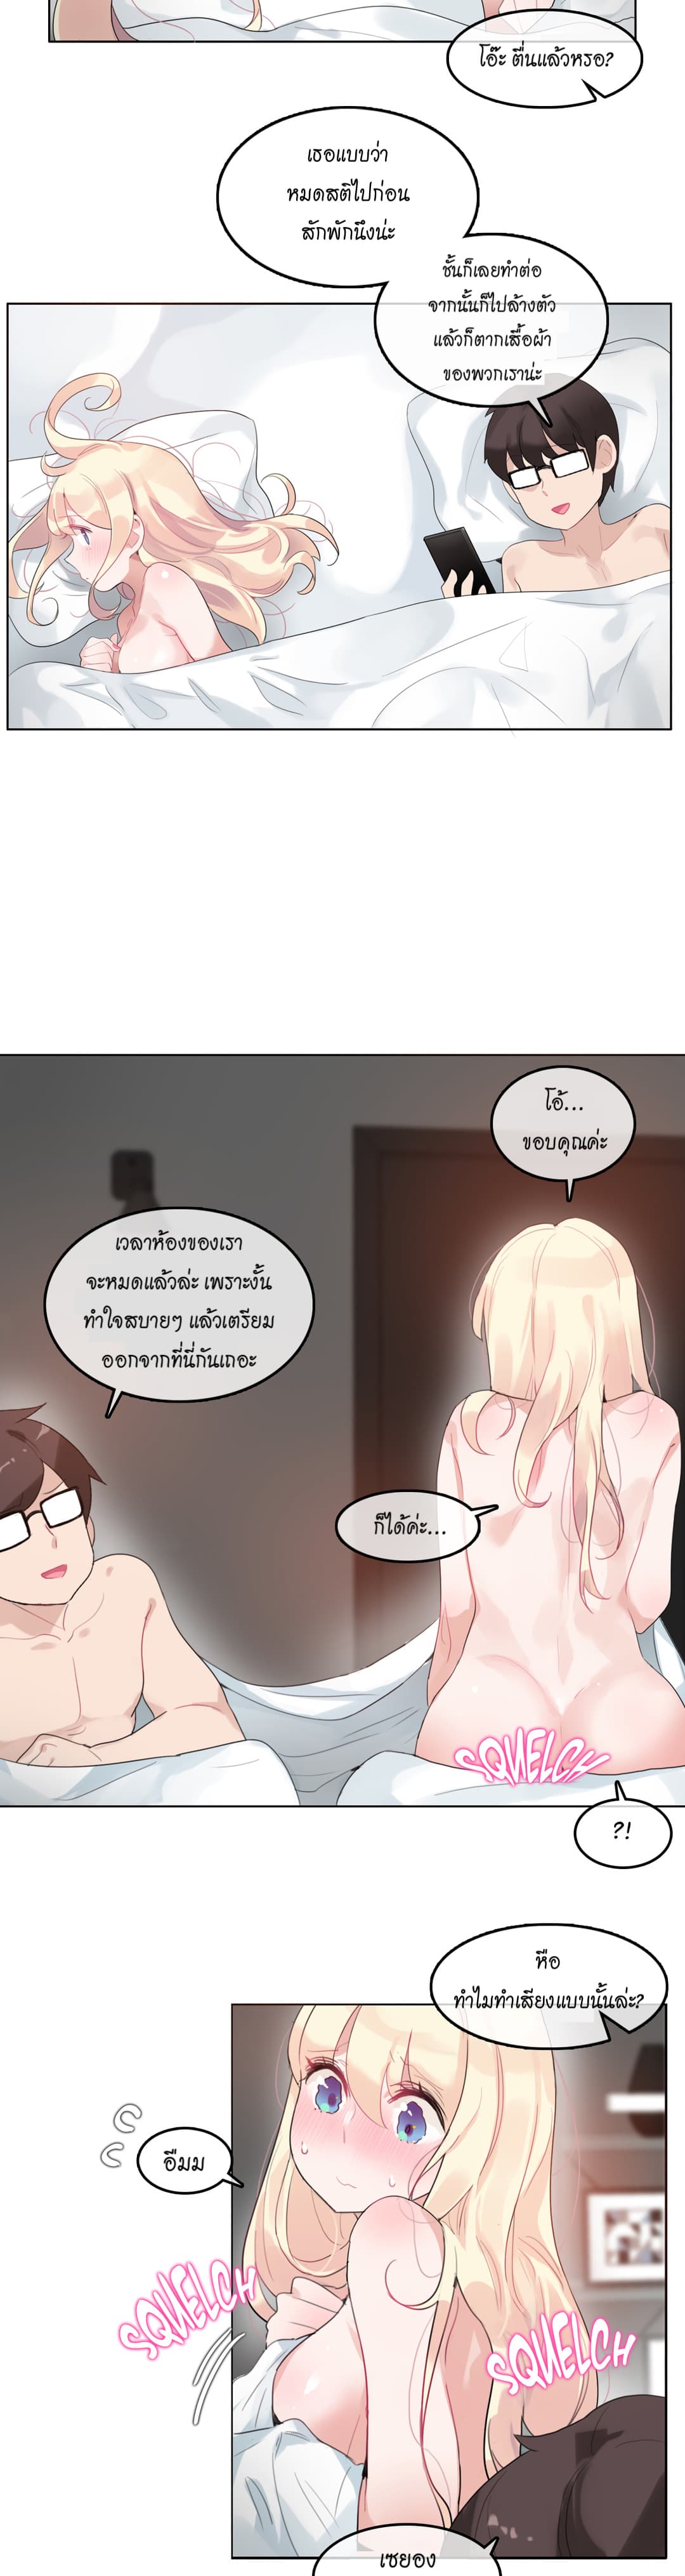 A Pervert’s Daily Life 44 (14)